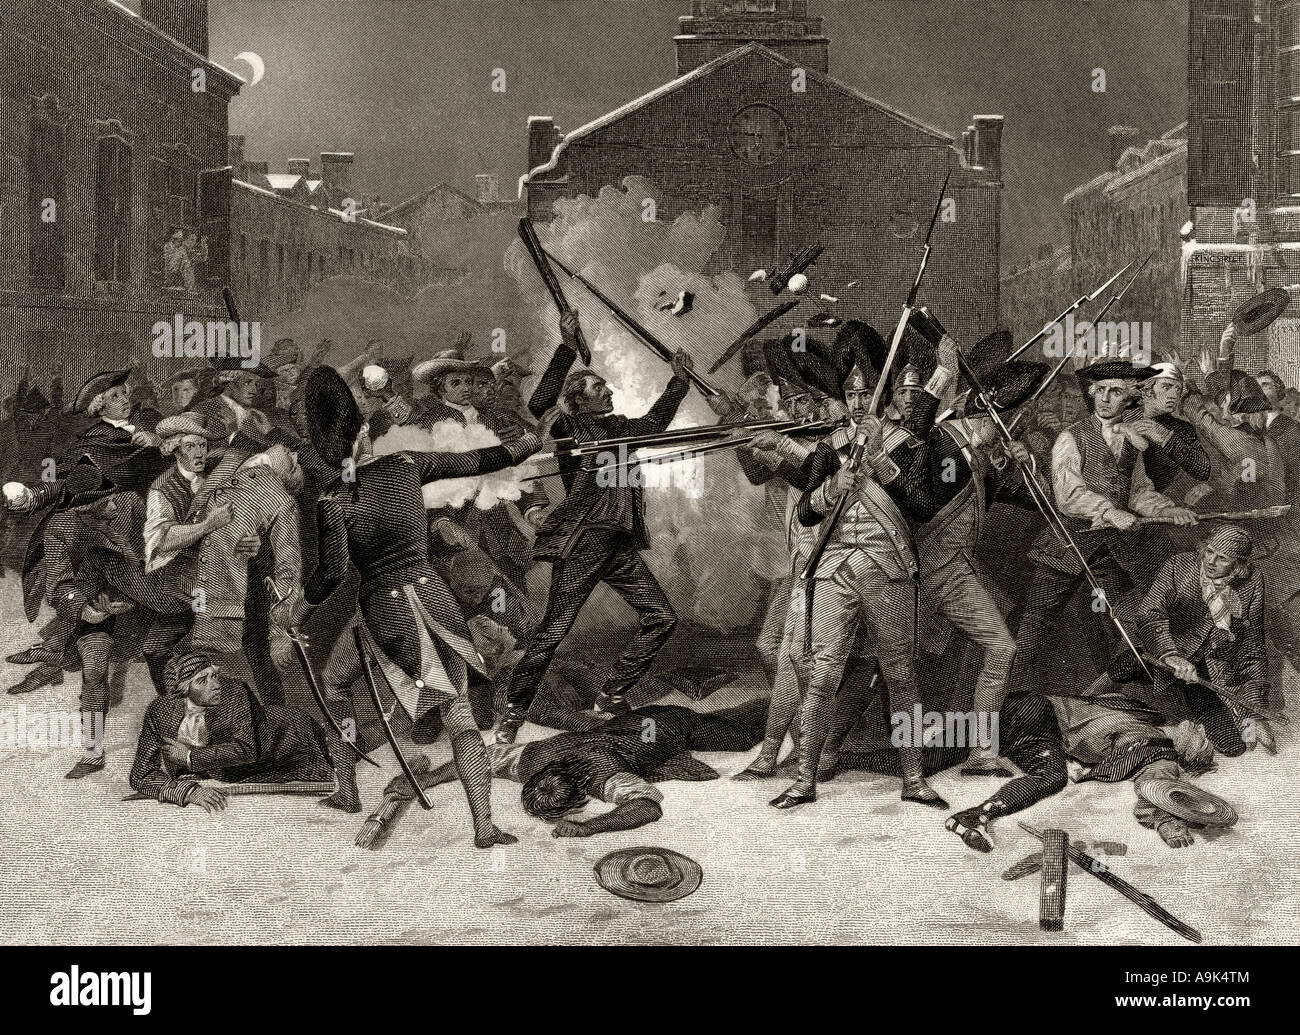 The Boston Massacre, also known as the Incident on King Street, March 5, 1770, when British soldiers shot several civilians. Stock Photo